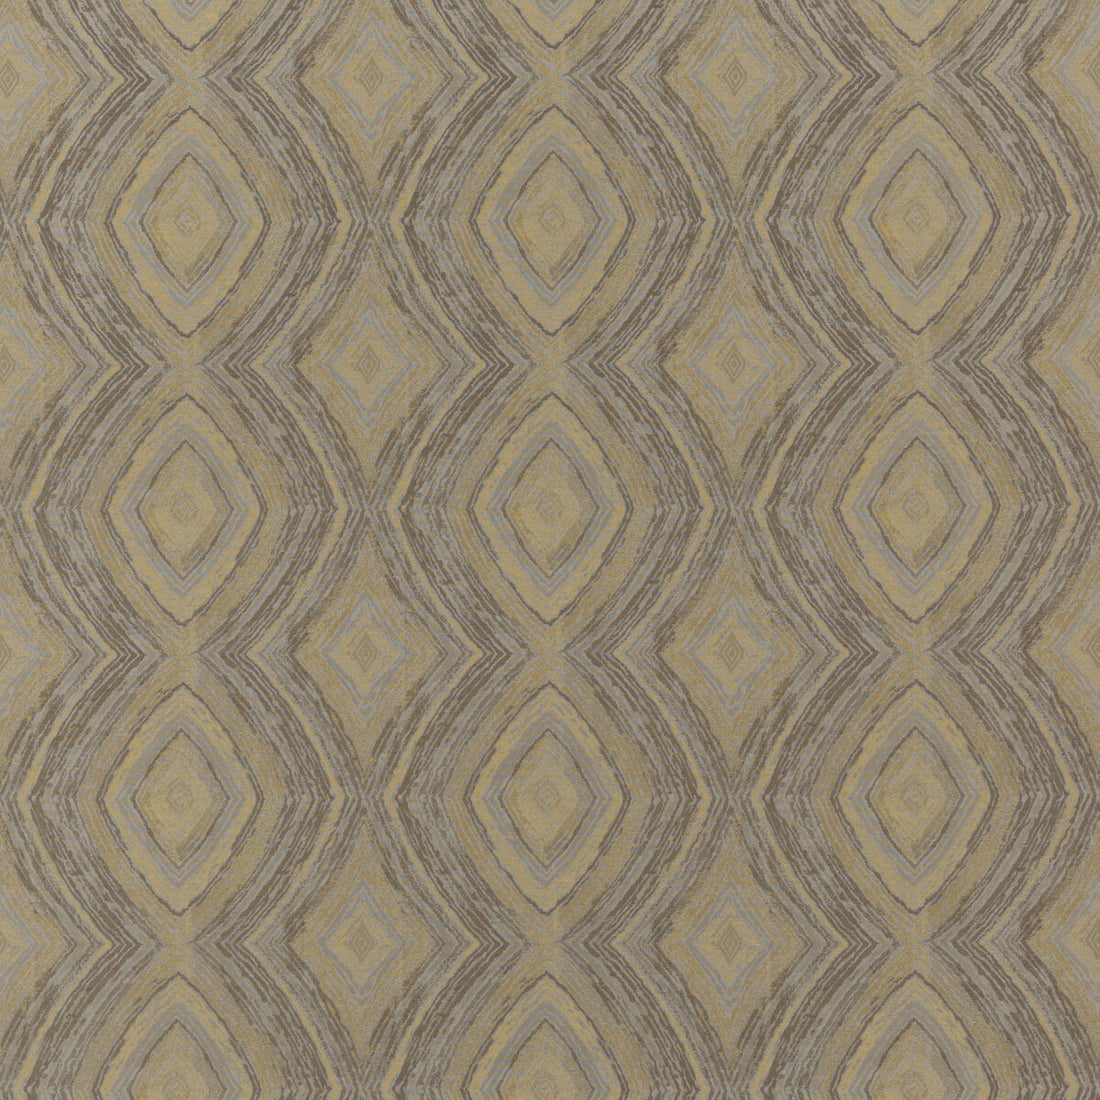 Fossil fabric in bronze color - pattern ED85275.1.0 - by Threads in the Meridian collection